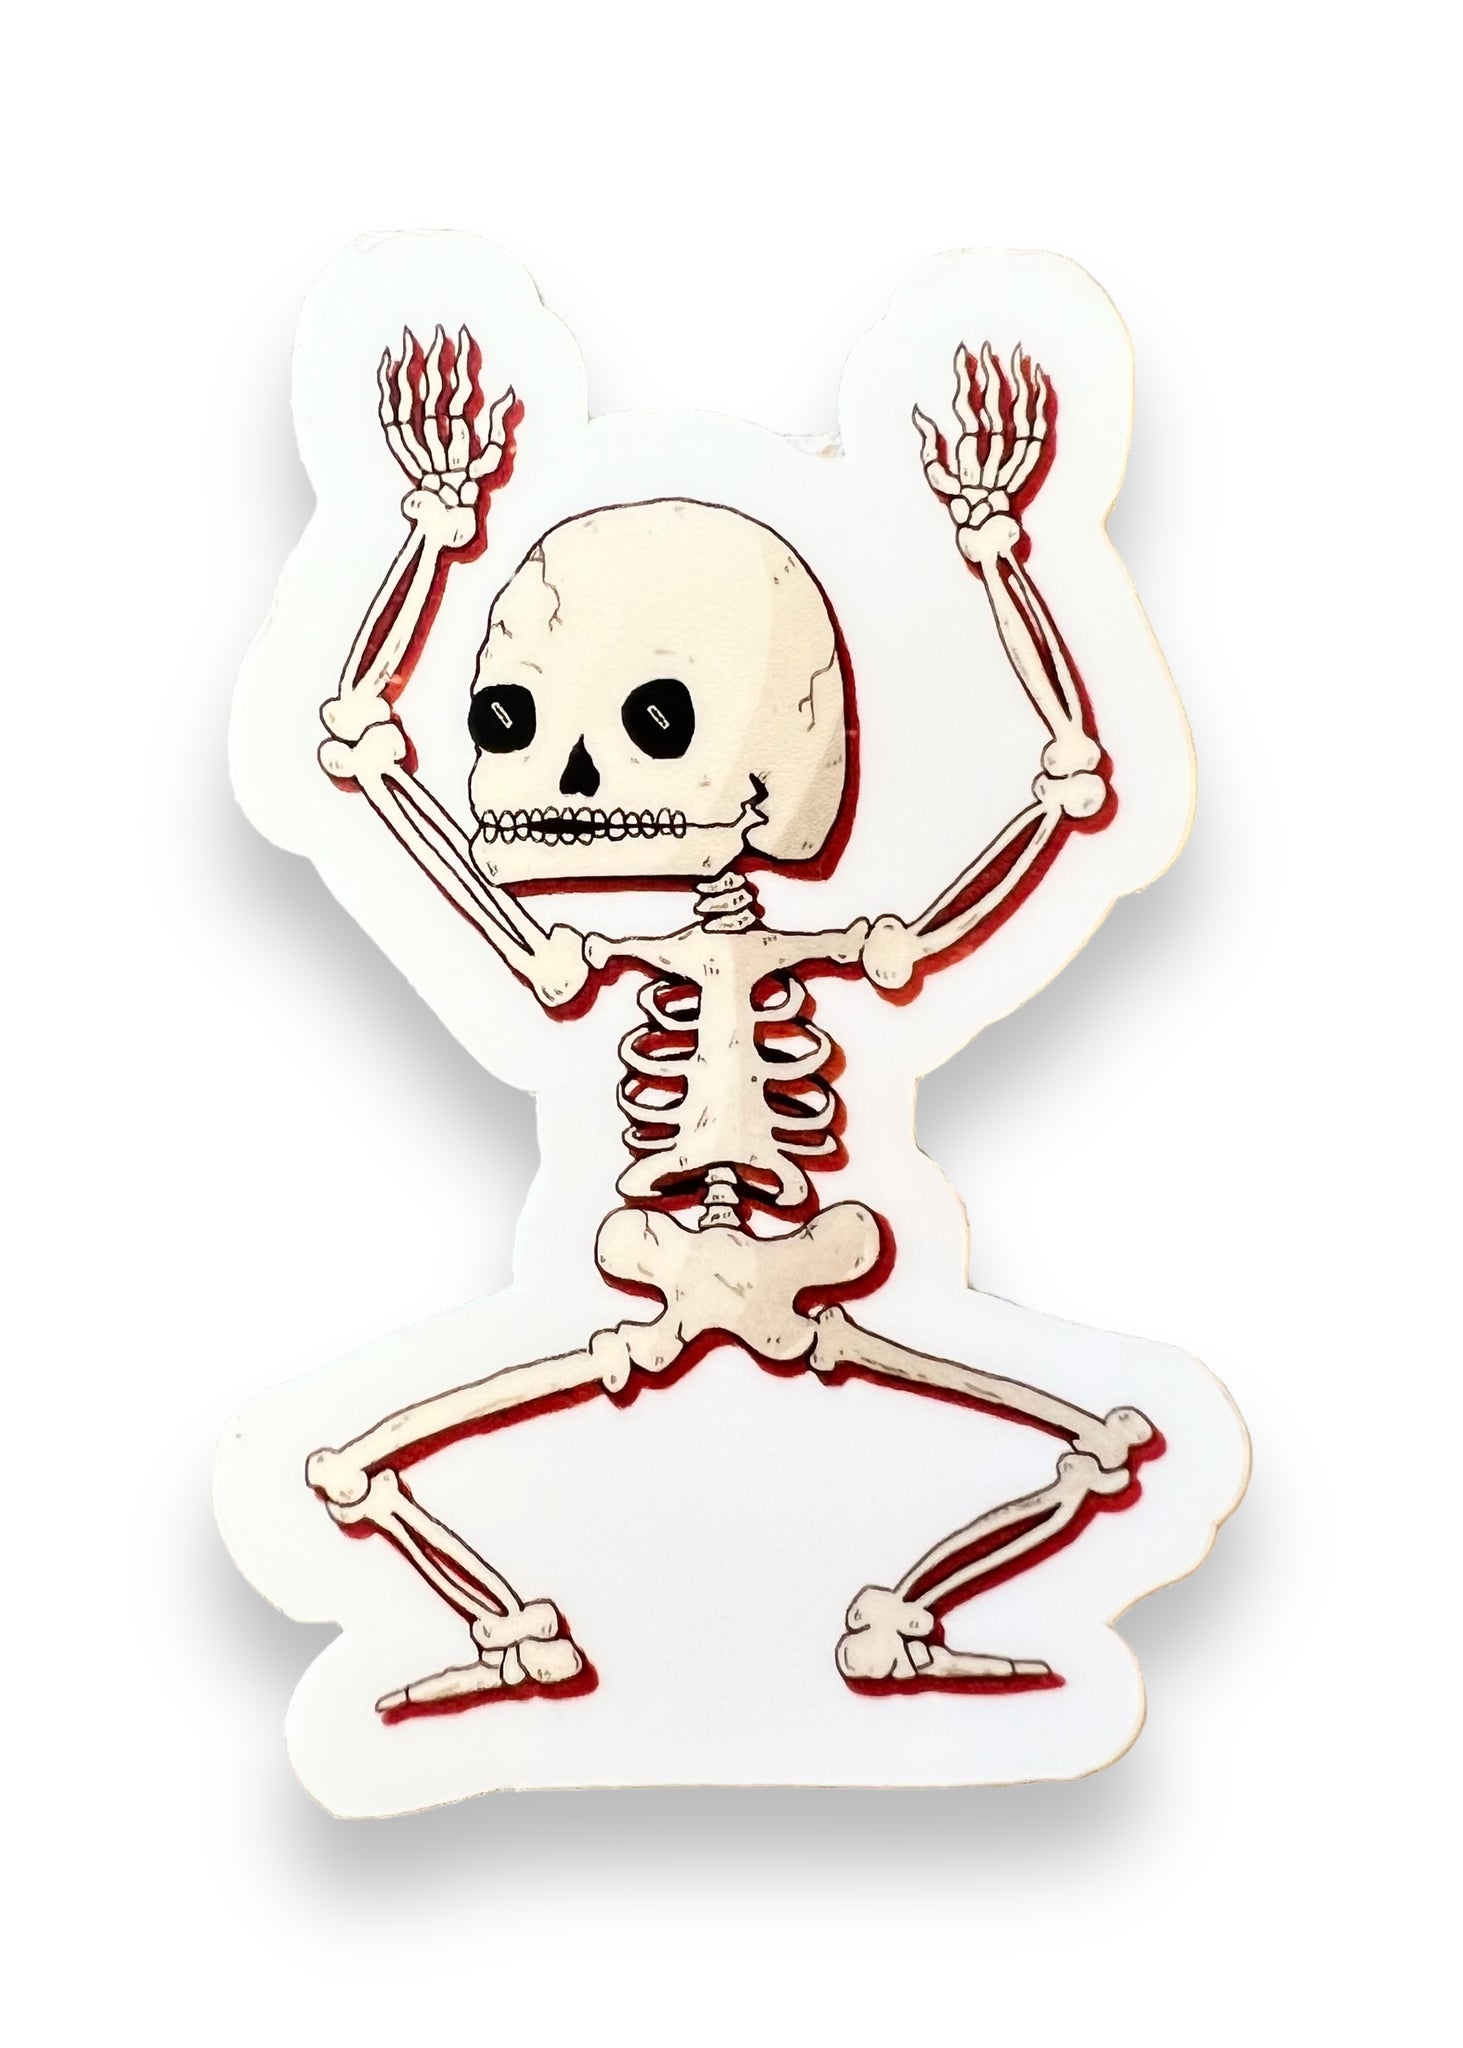 Dancing Skeleton Sticker by Big Moods, Sold by Le Monkey House